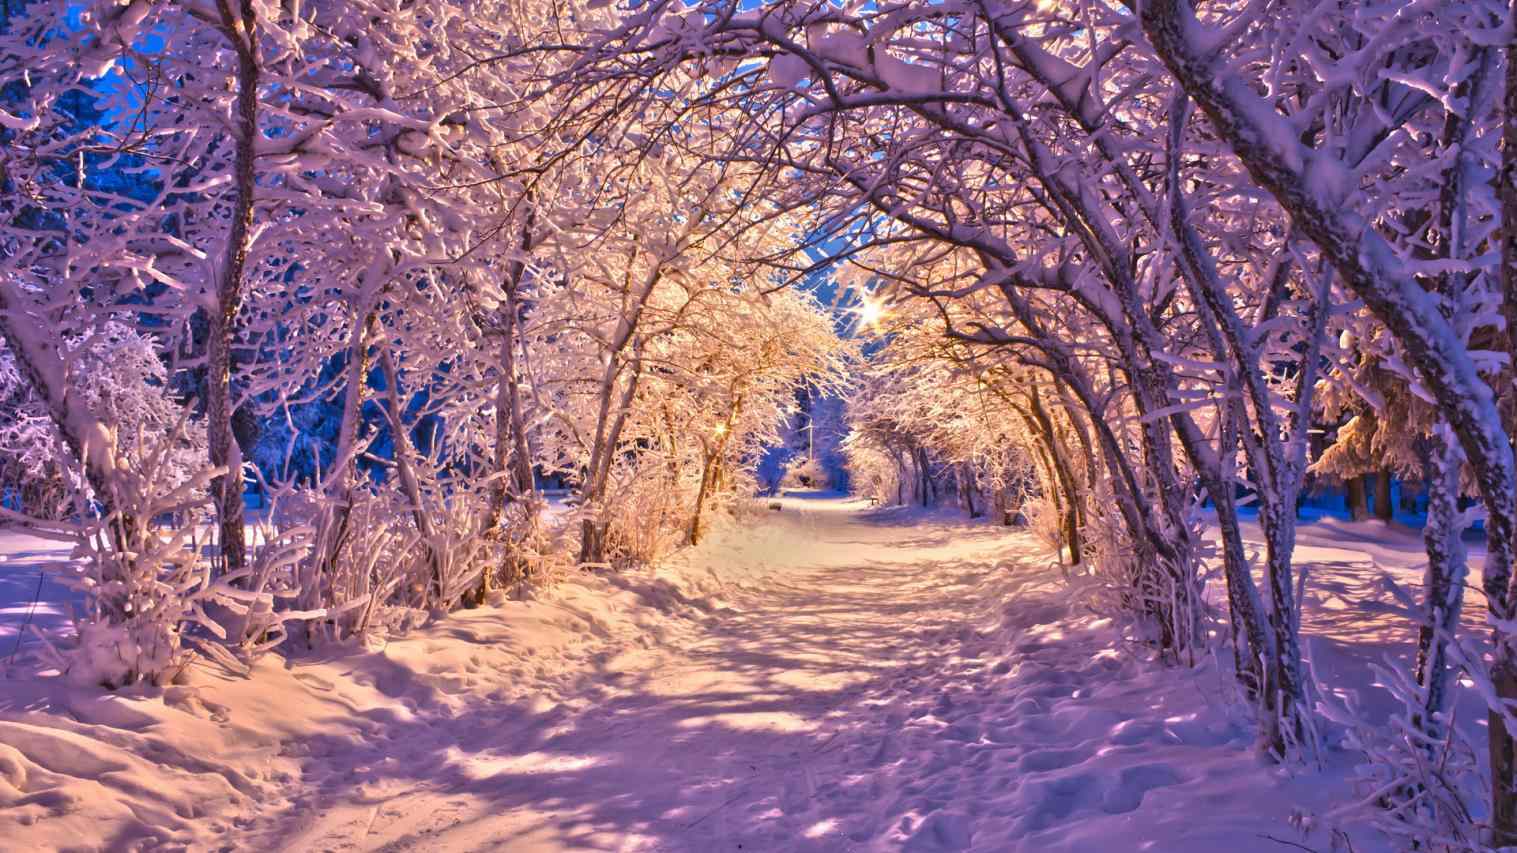 Snow Beautiful Snowy Christmas Landscapes Backgrounds # Christmas